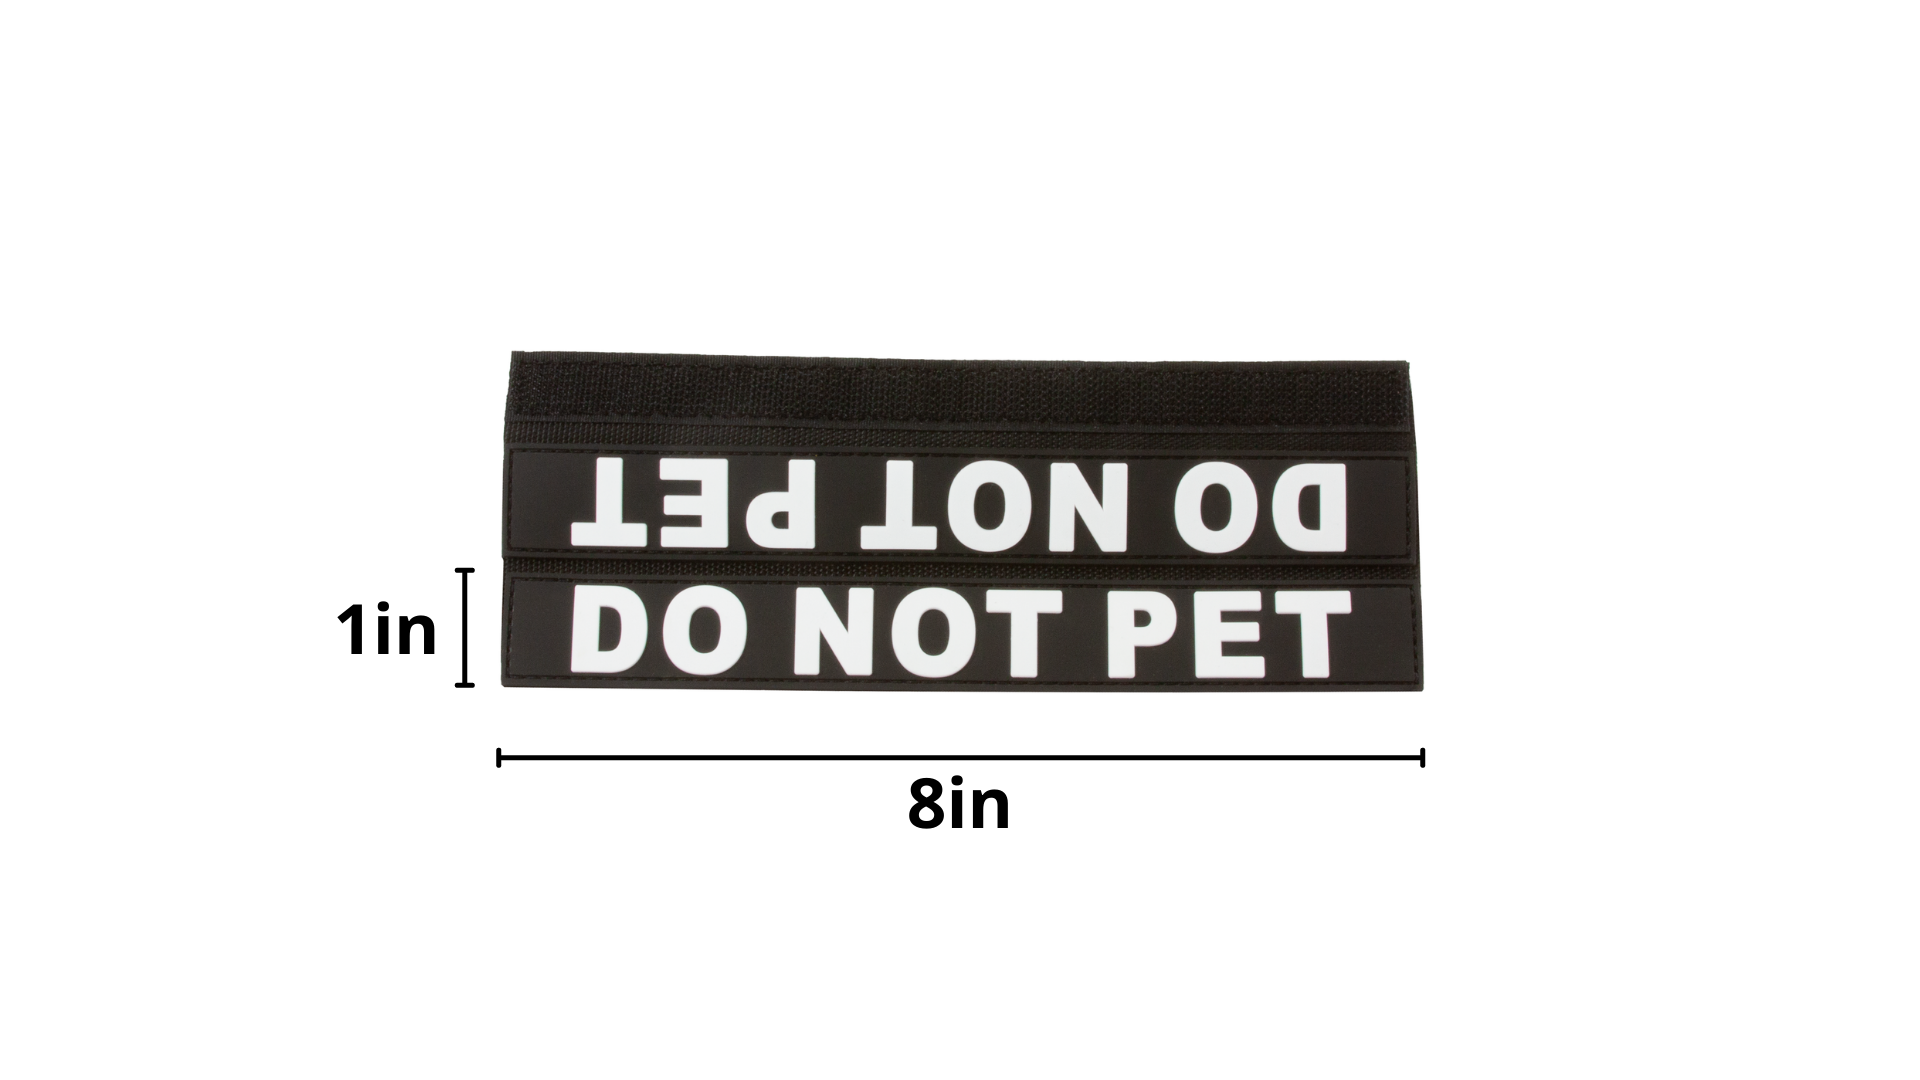 Tacticollar - Dog Leash Sleeves, Double Sided, Highly Visible, Provide Advanced Warning to Prevent Accidents Do Not Pet Black